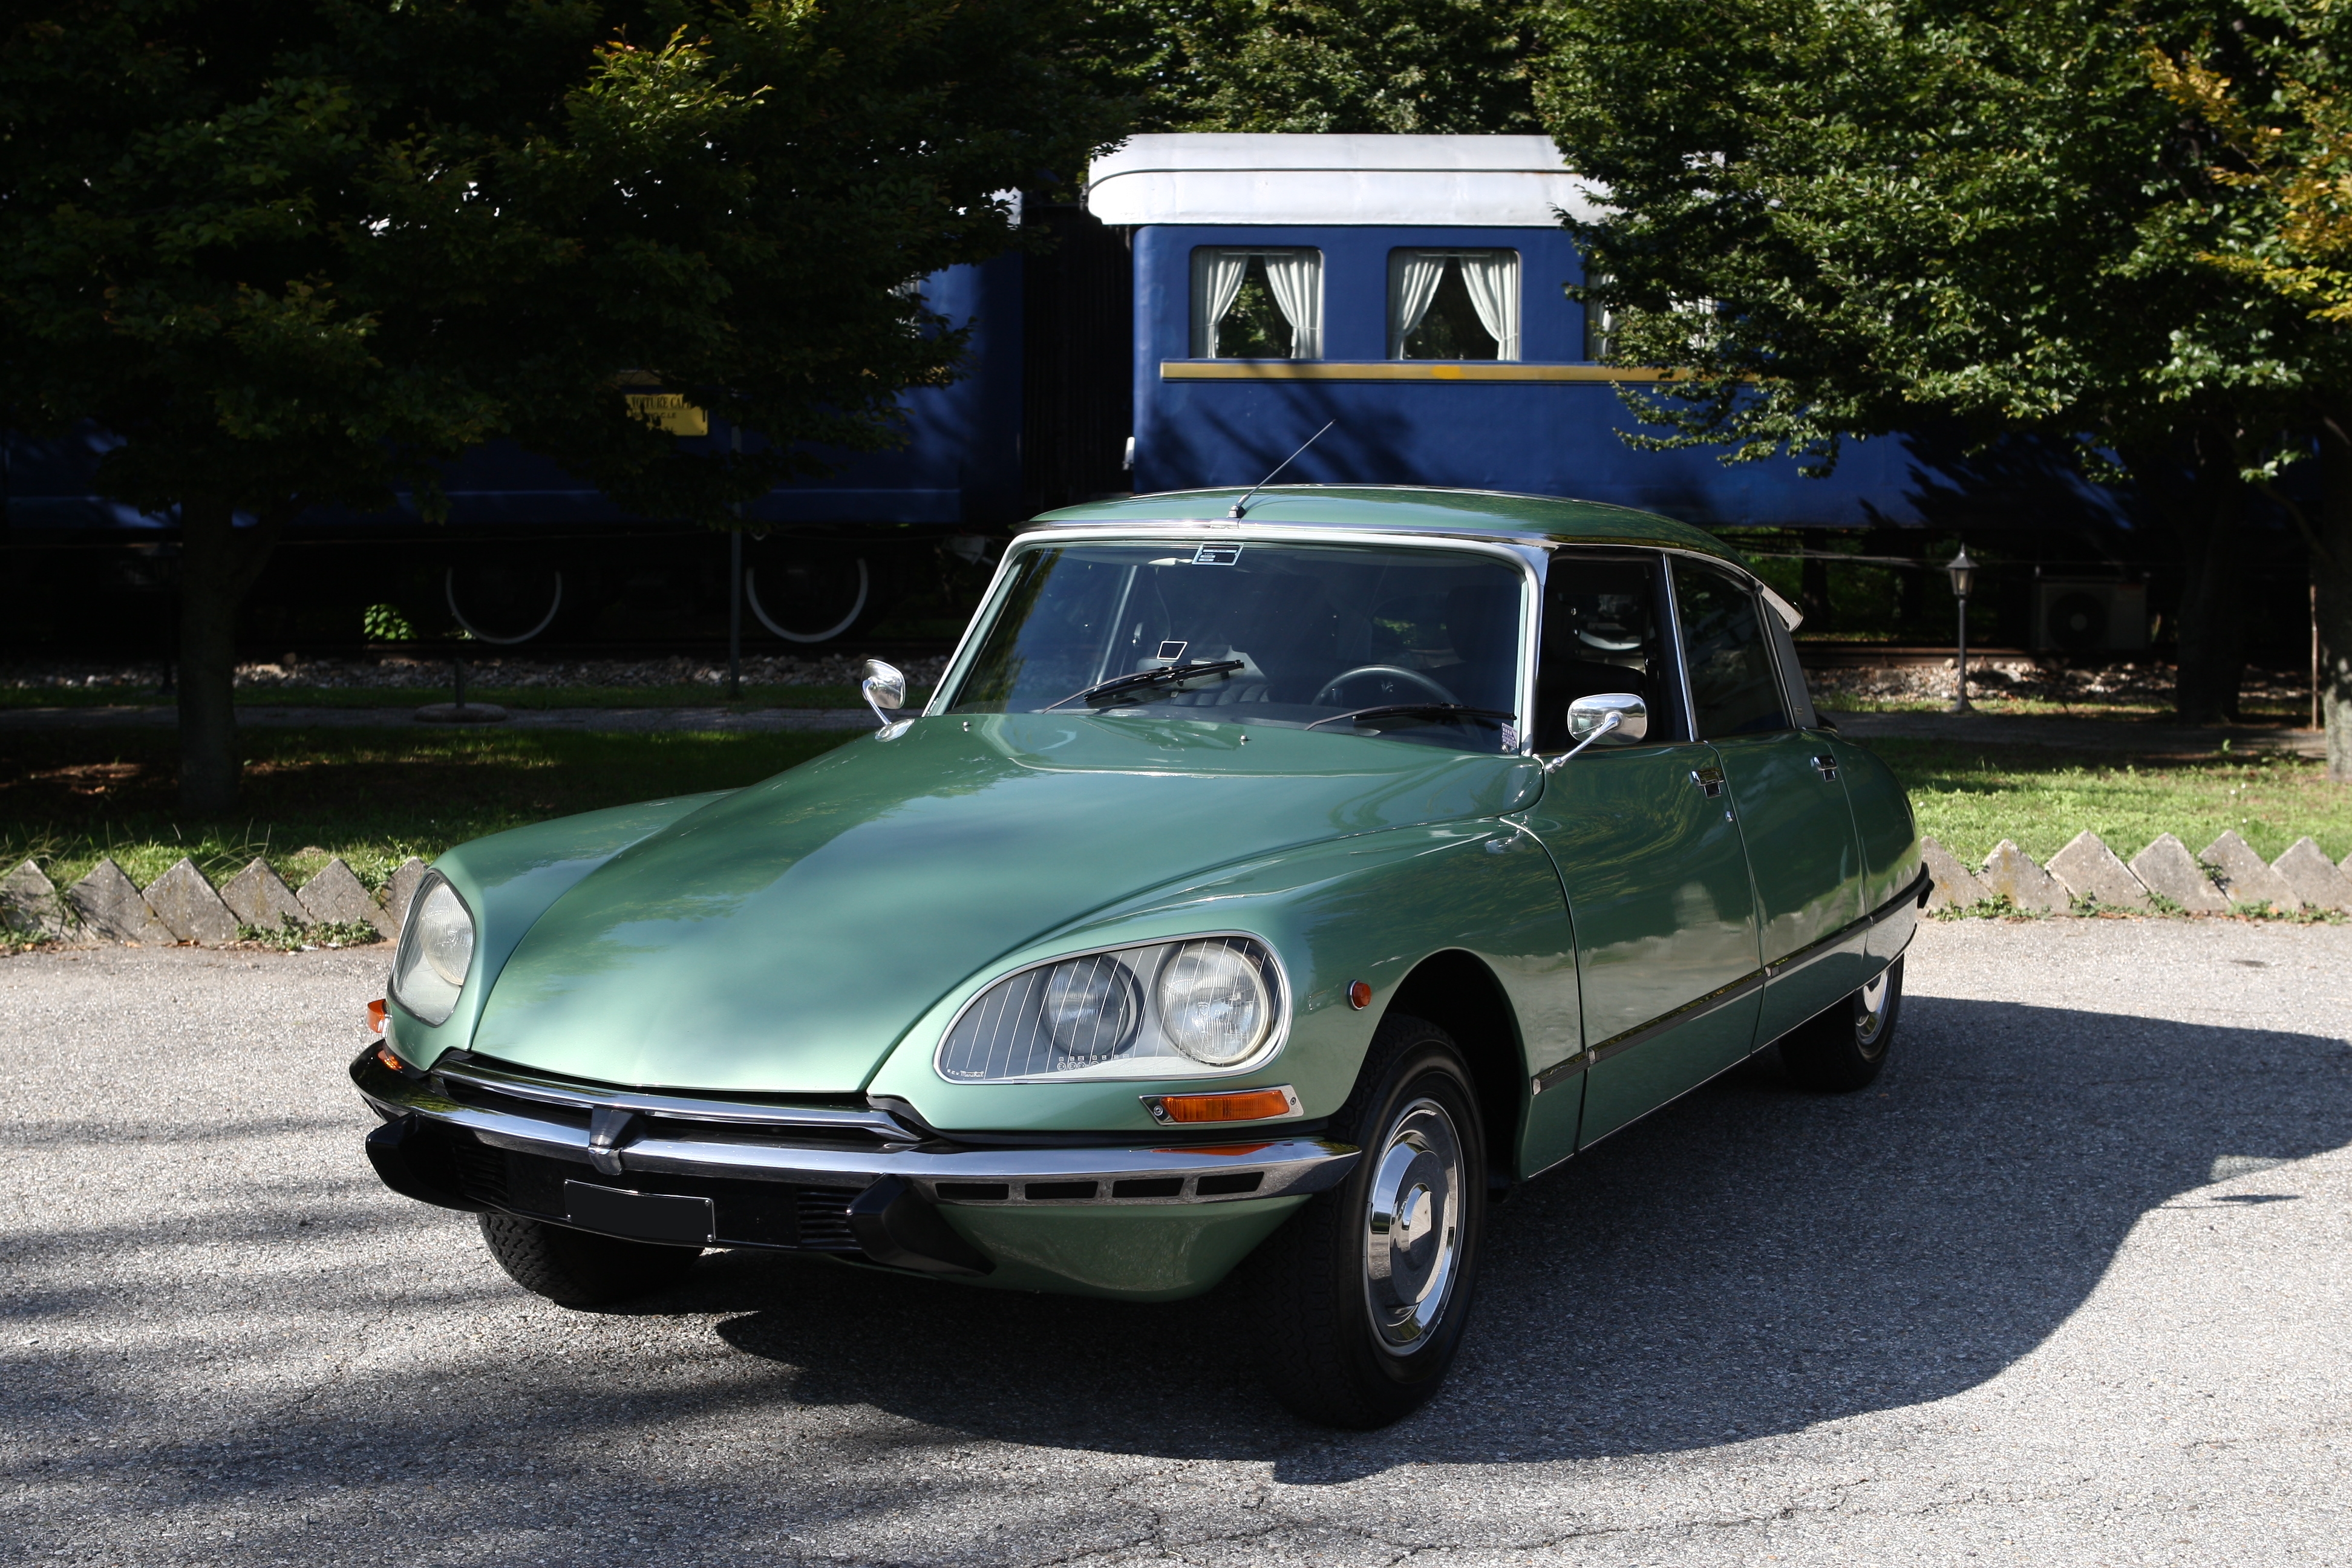 The Citroën DS: A Goddess Ahead of its Time | Dyler